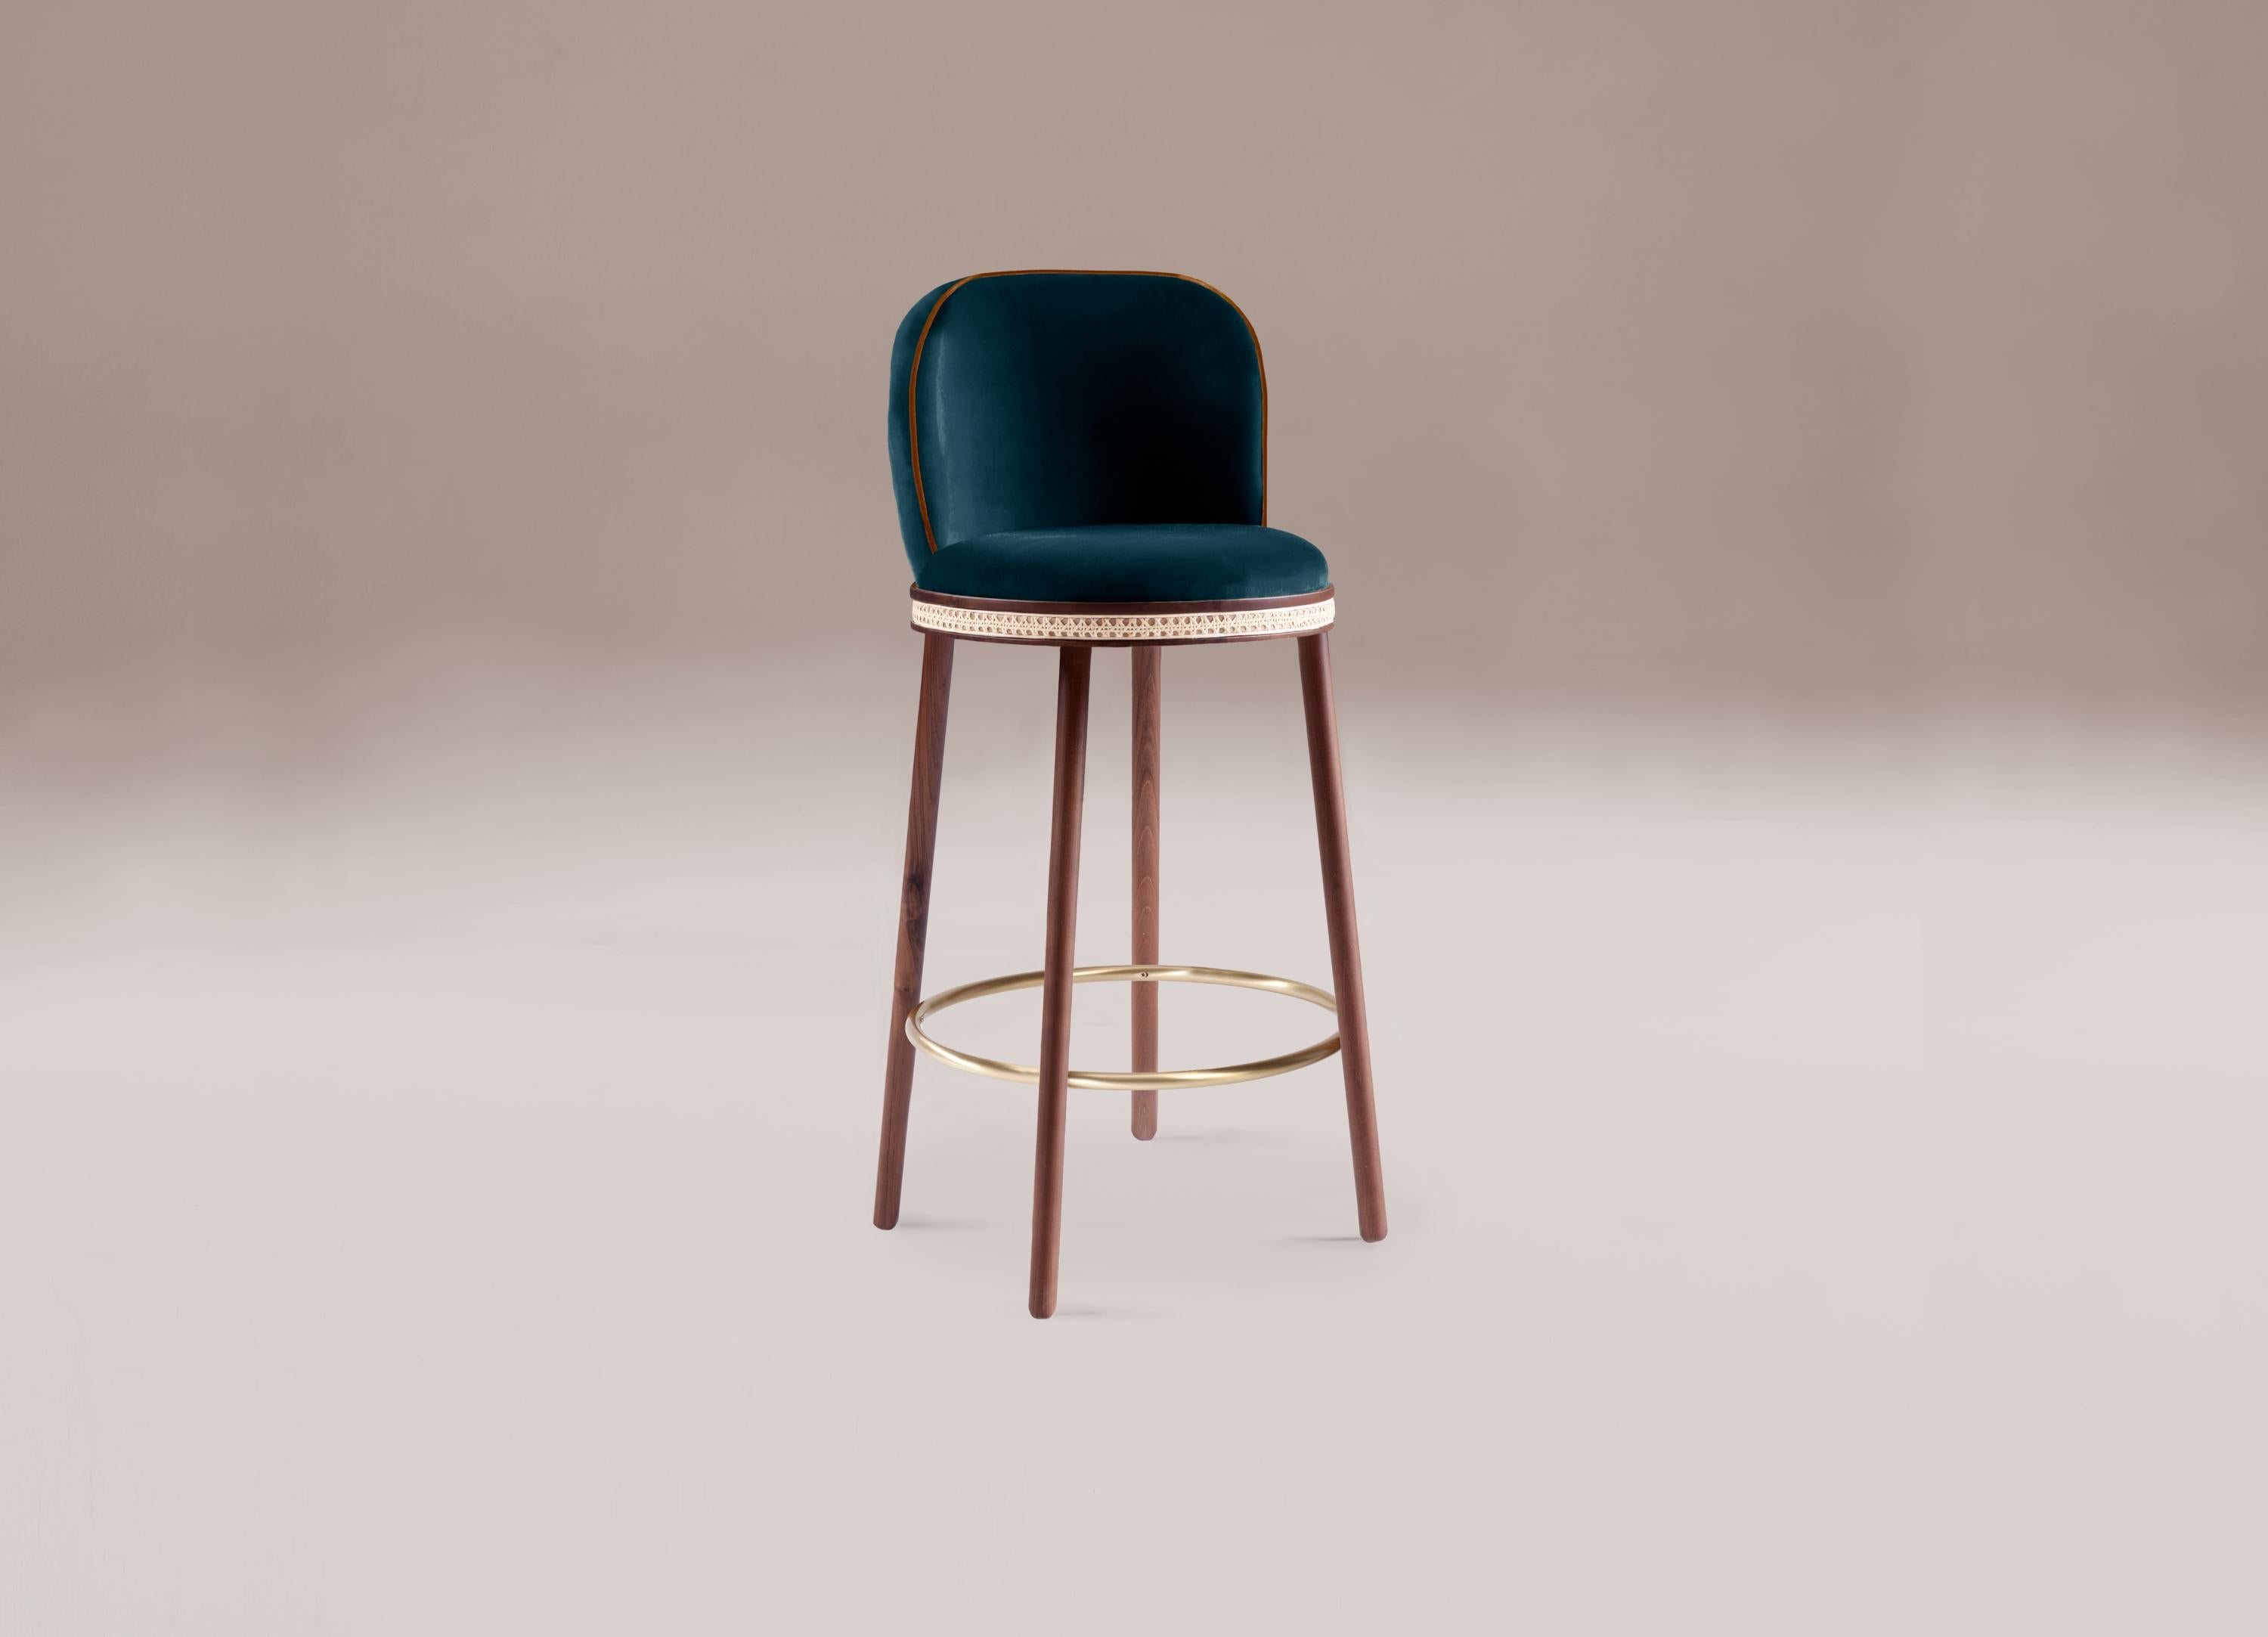 Alma Bar Chair by Dooq
Dimensions:
W 46 cm 18”
D 51 cm 20”
H 100 cm 39”
seat height: 75 cm 30”
Materials: upholstery fabric or leather; structure solid wood feet lacquered MDF or solid wood rattan natural rattan. COM with natural walnut or natural